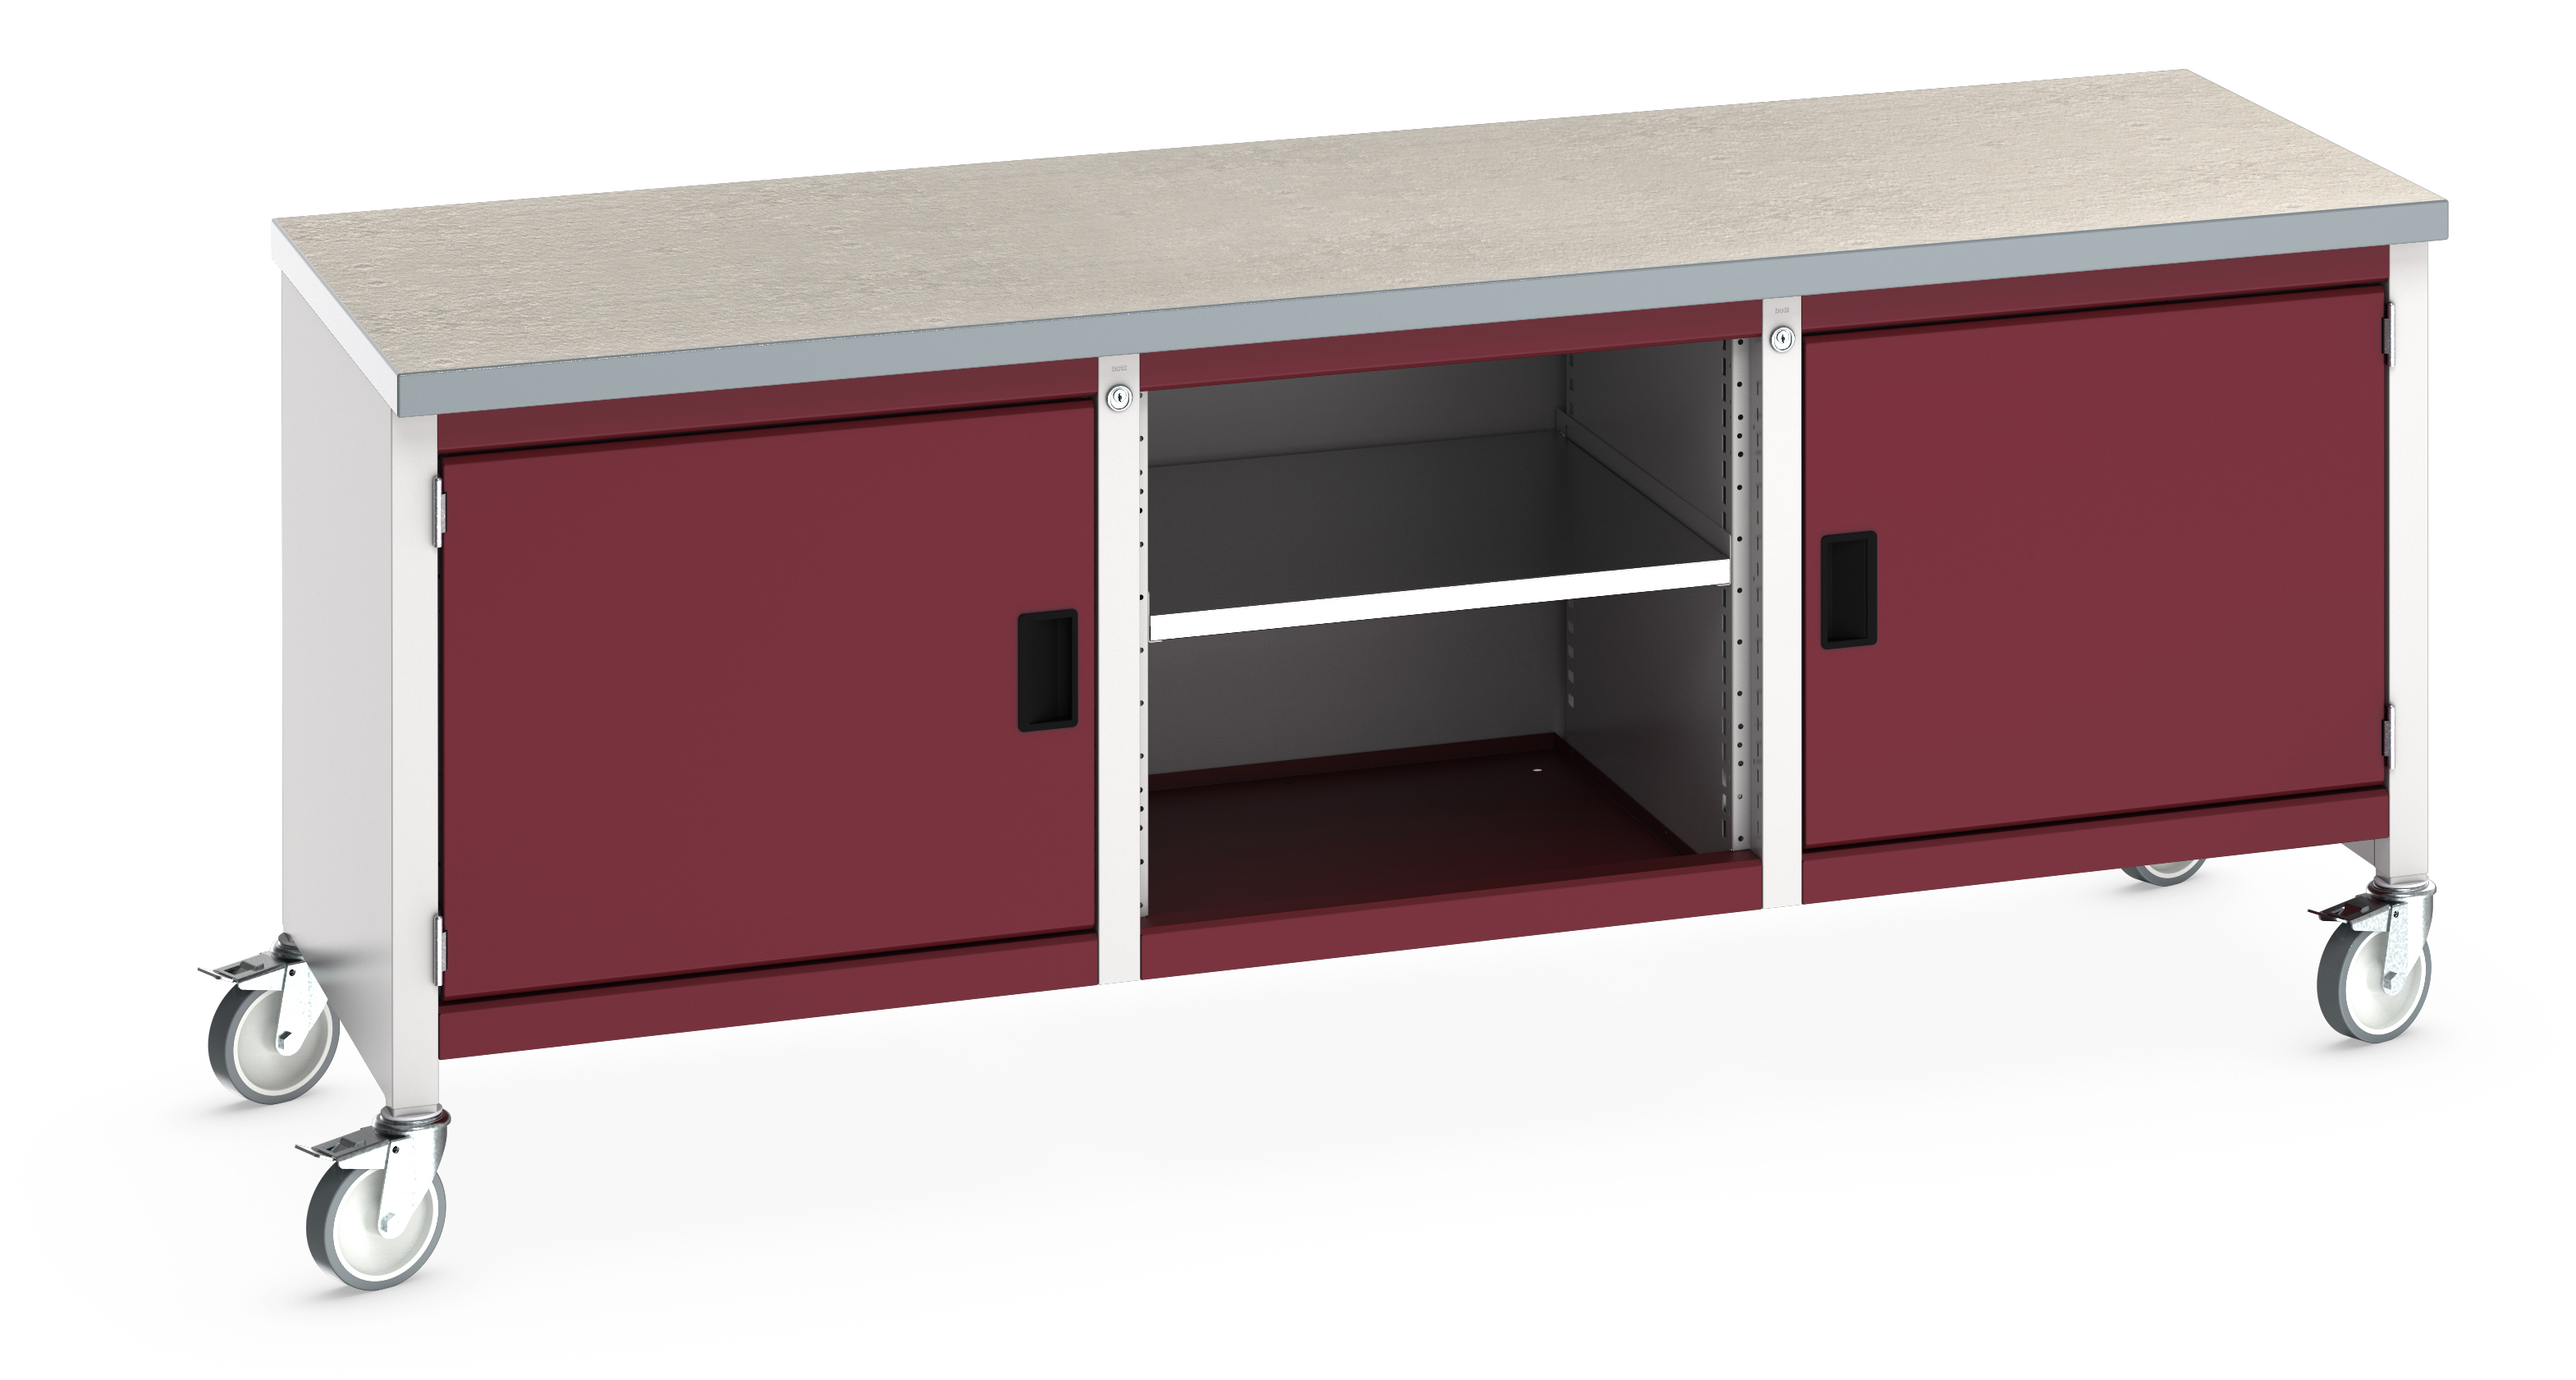 Bott Cubio Mobile Storage Bench With Full Cupboard / Open Cupboard /Full Cupboard - 41002120.24V